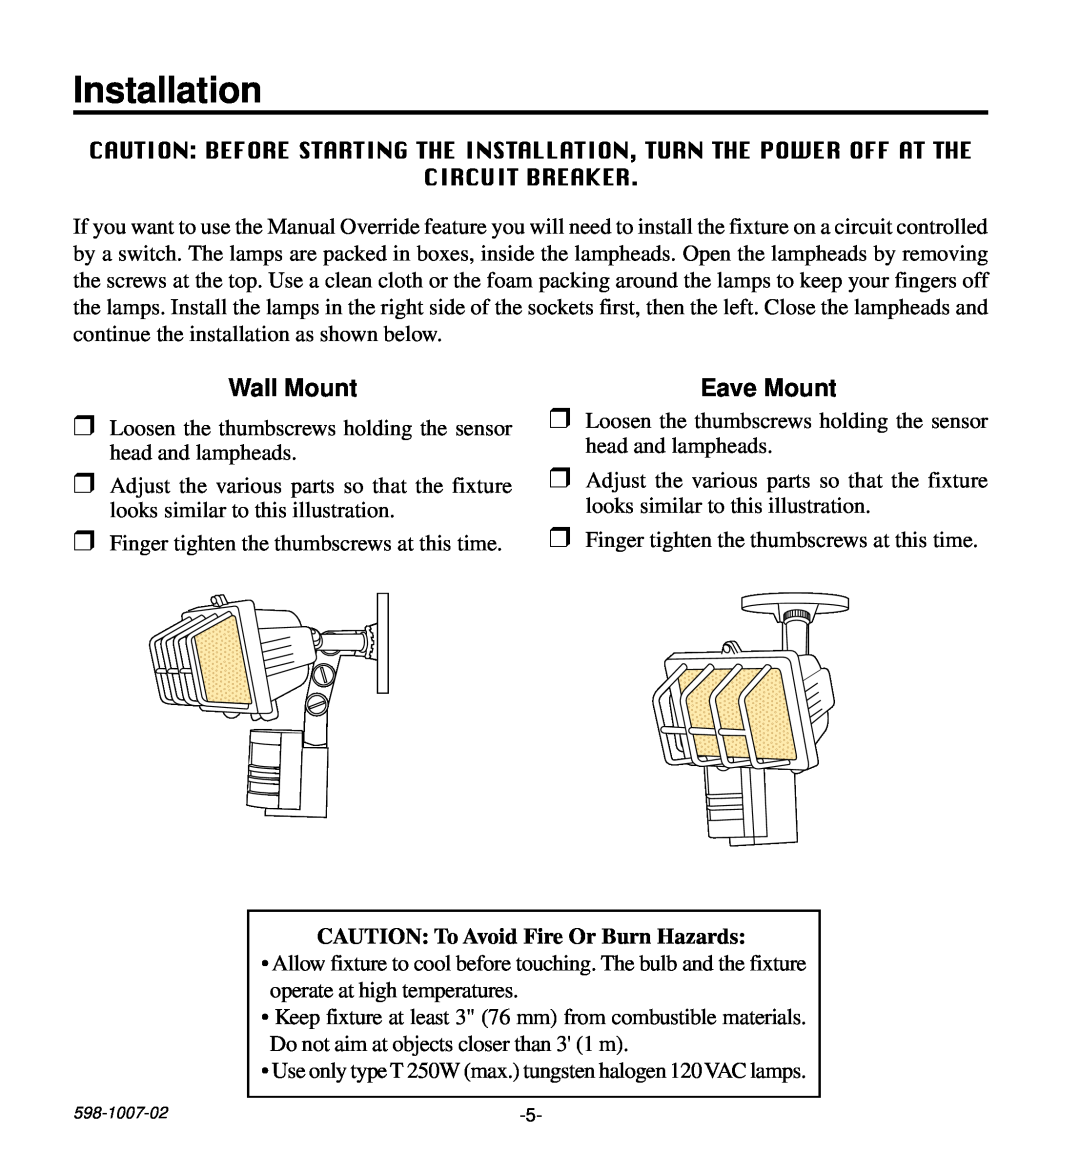 Desa HD-9260 manual Installation, Wall Mount, Eave Mount, CAUTION: To Avoid Fire Or Burn Hazards 